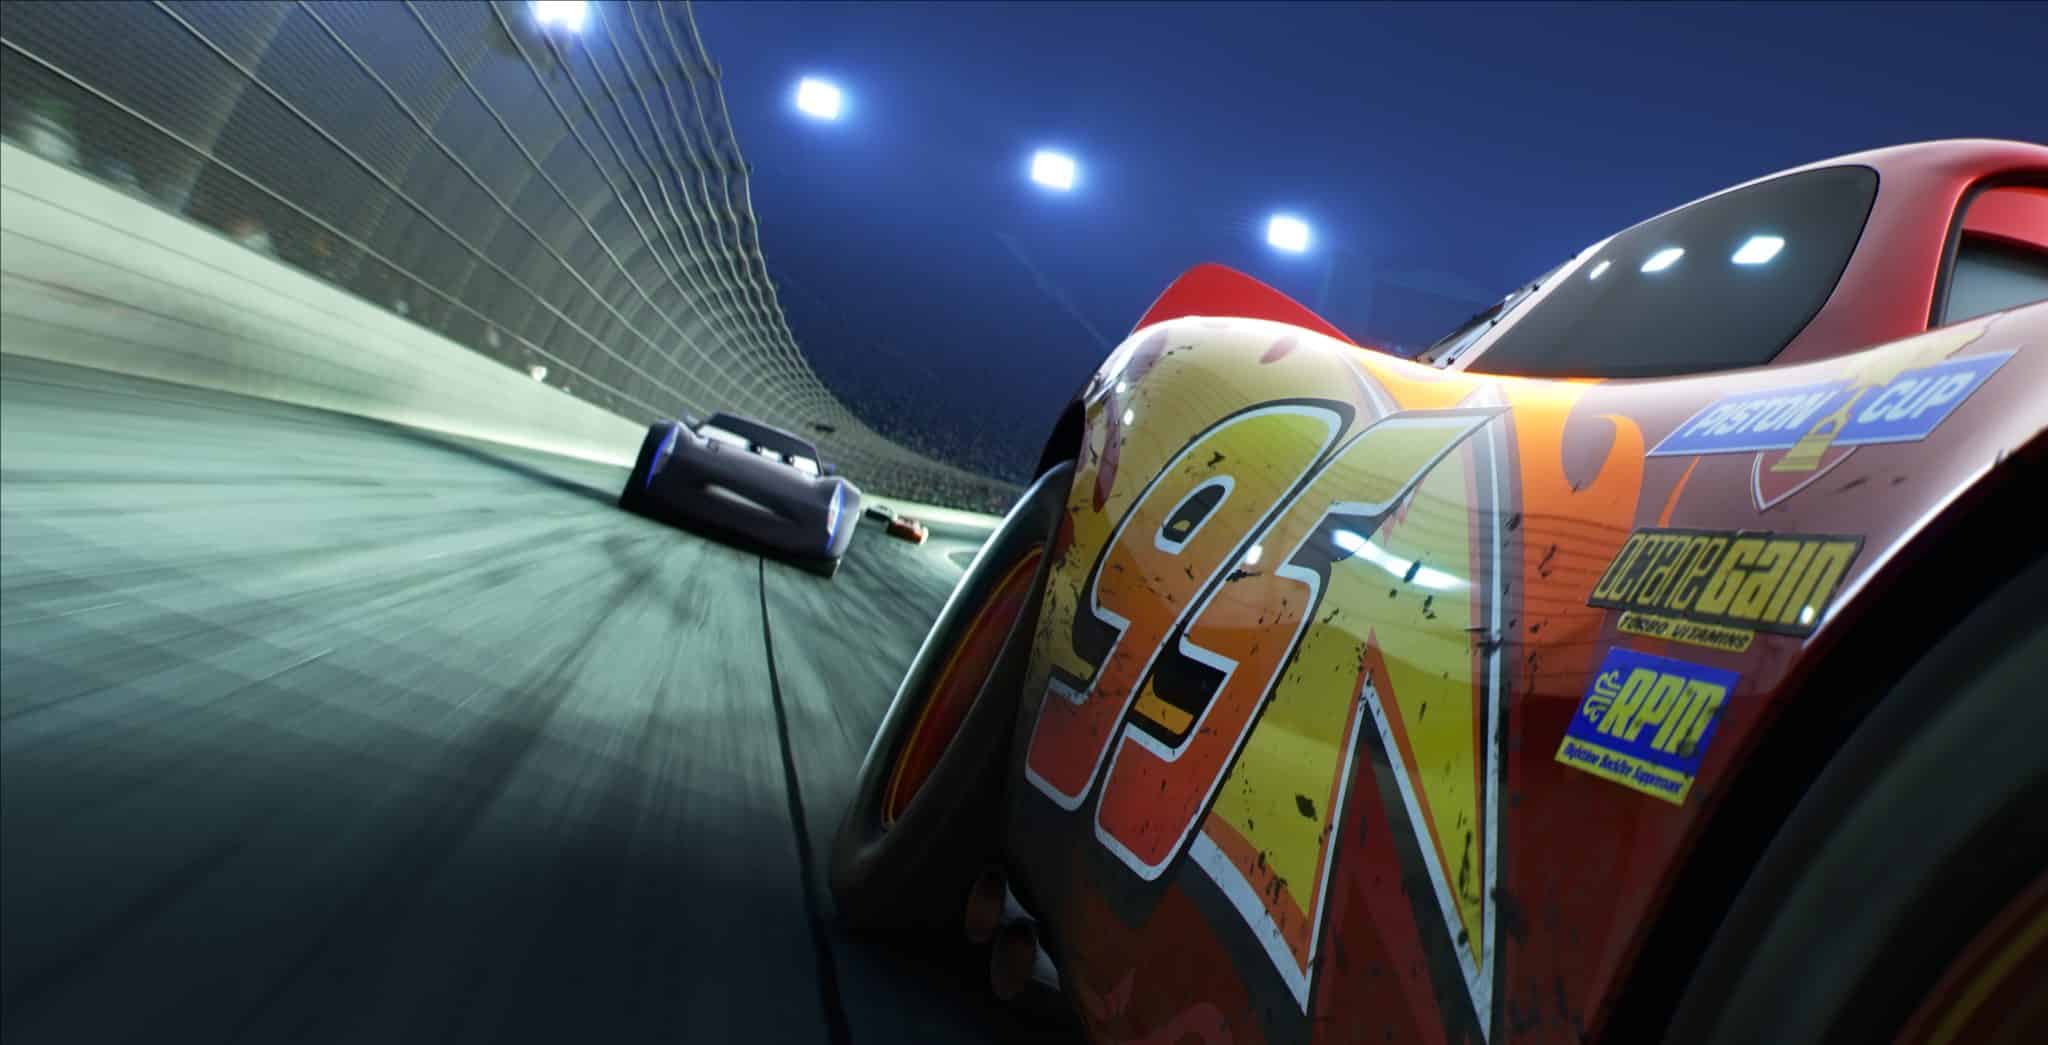 REAR VIEW — The legendary #95 may be leading the pack, but the high-tech Next Gen racers are closing in fast. Directed by Brian Fee and produced by Kevin Reher, “Cars 3” cruises into theaters on June 16, 2017. ©2016 Disney•Pixar. All Rights Reserved.